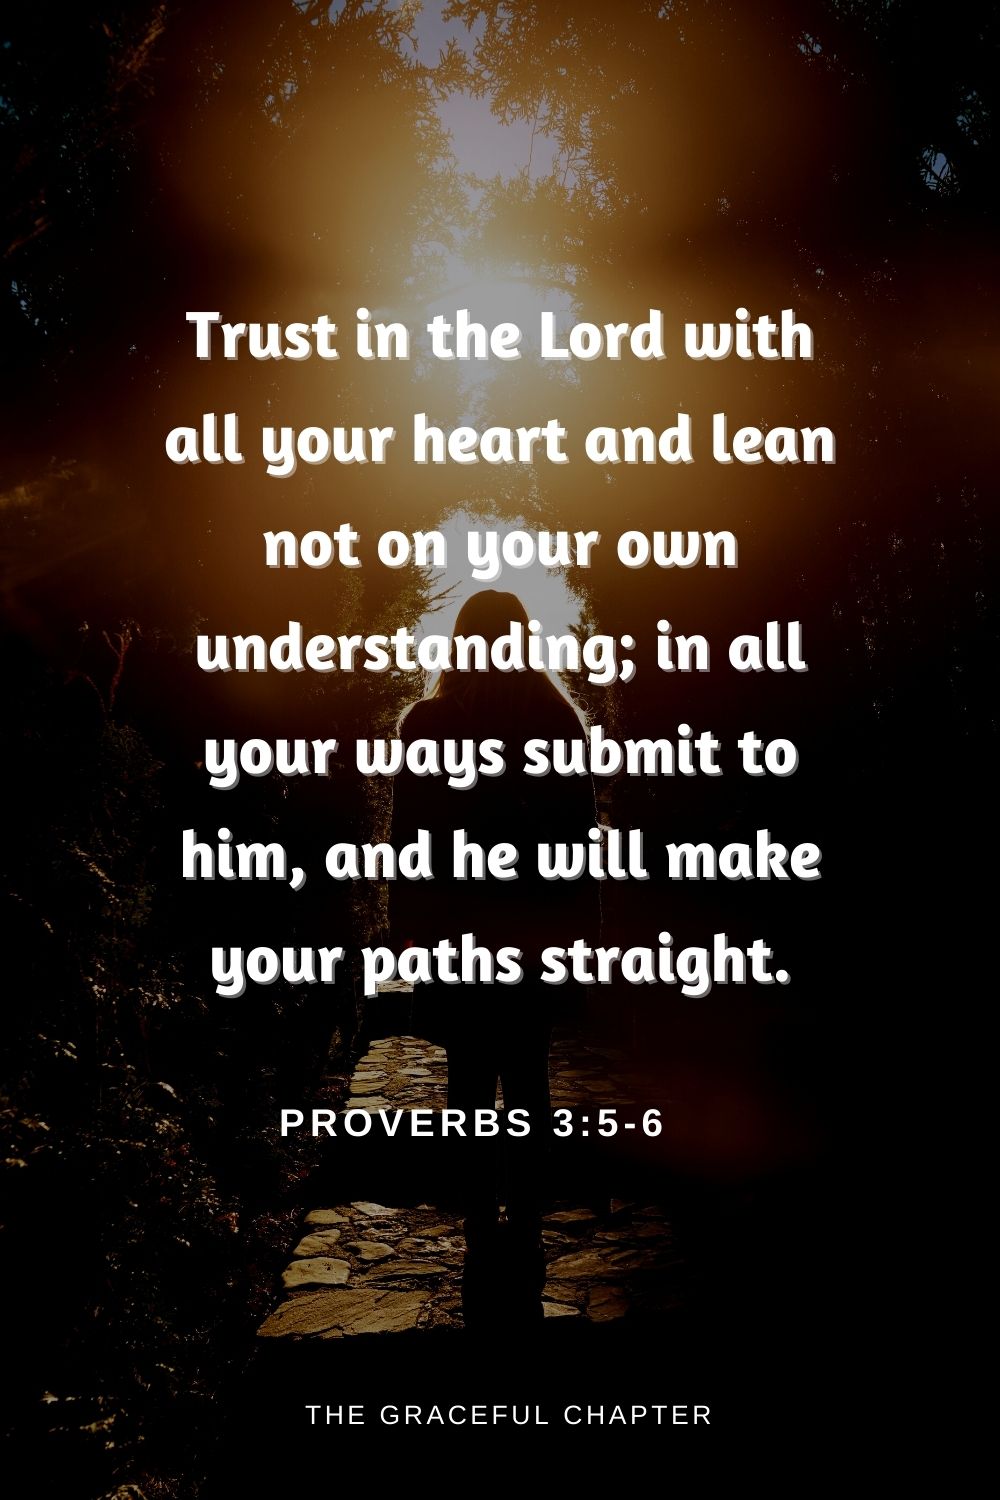 Trust in the Lord with all your heart and lean not on your own understanding; in all your ways submit to him, and he will make your paths straight.